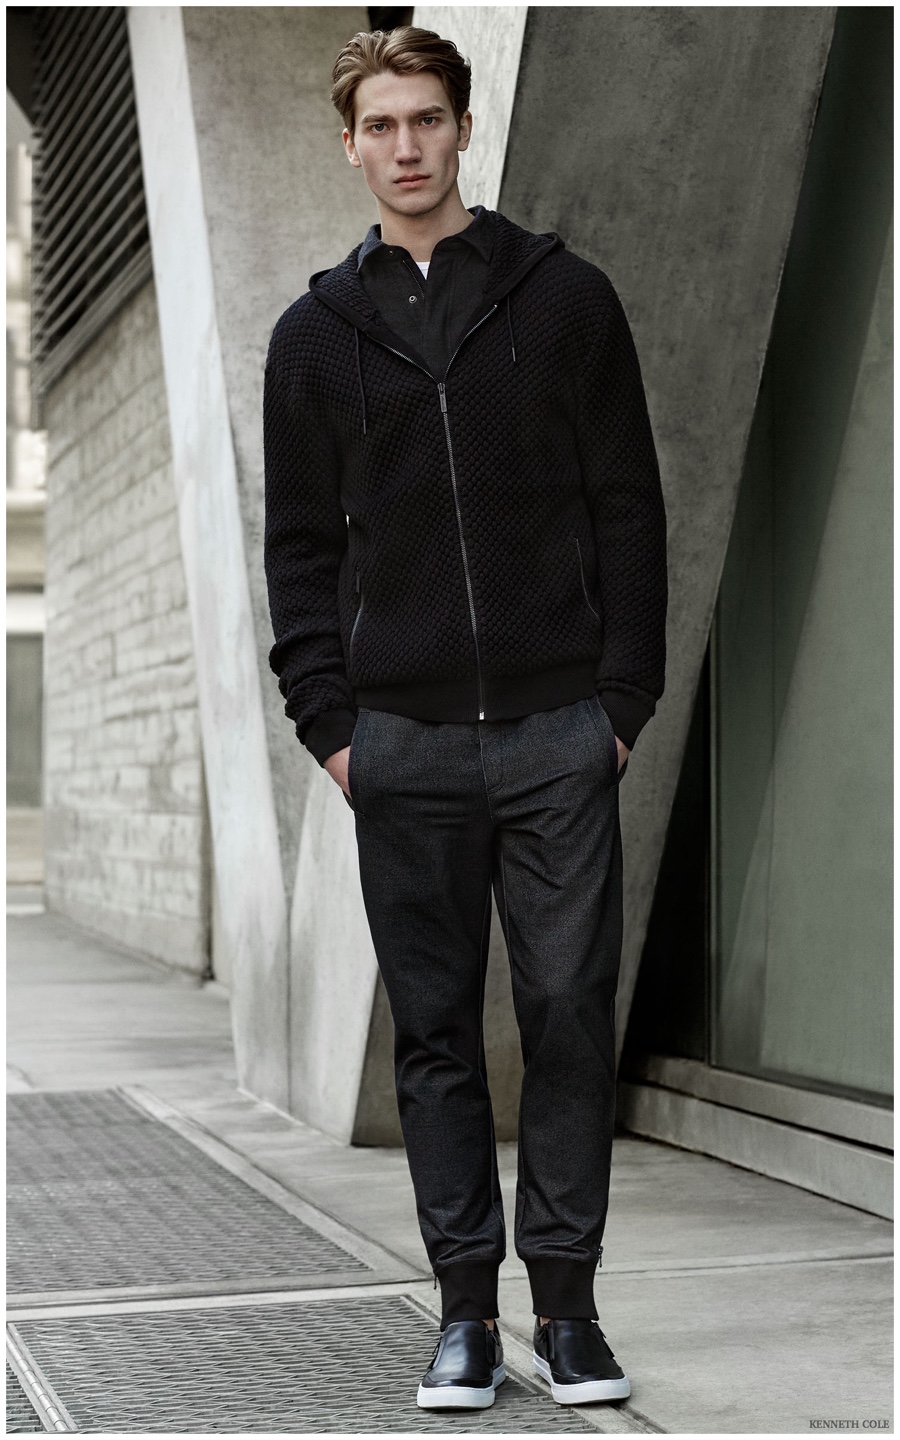 Kenneth Cole Fall/Winter 2015 Menswear Collection | The Fashionisto